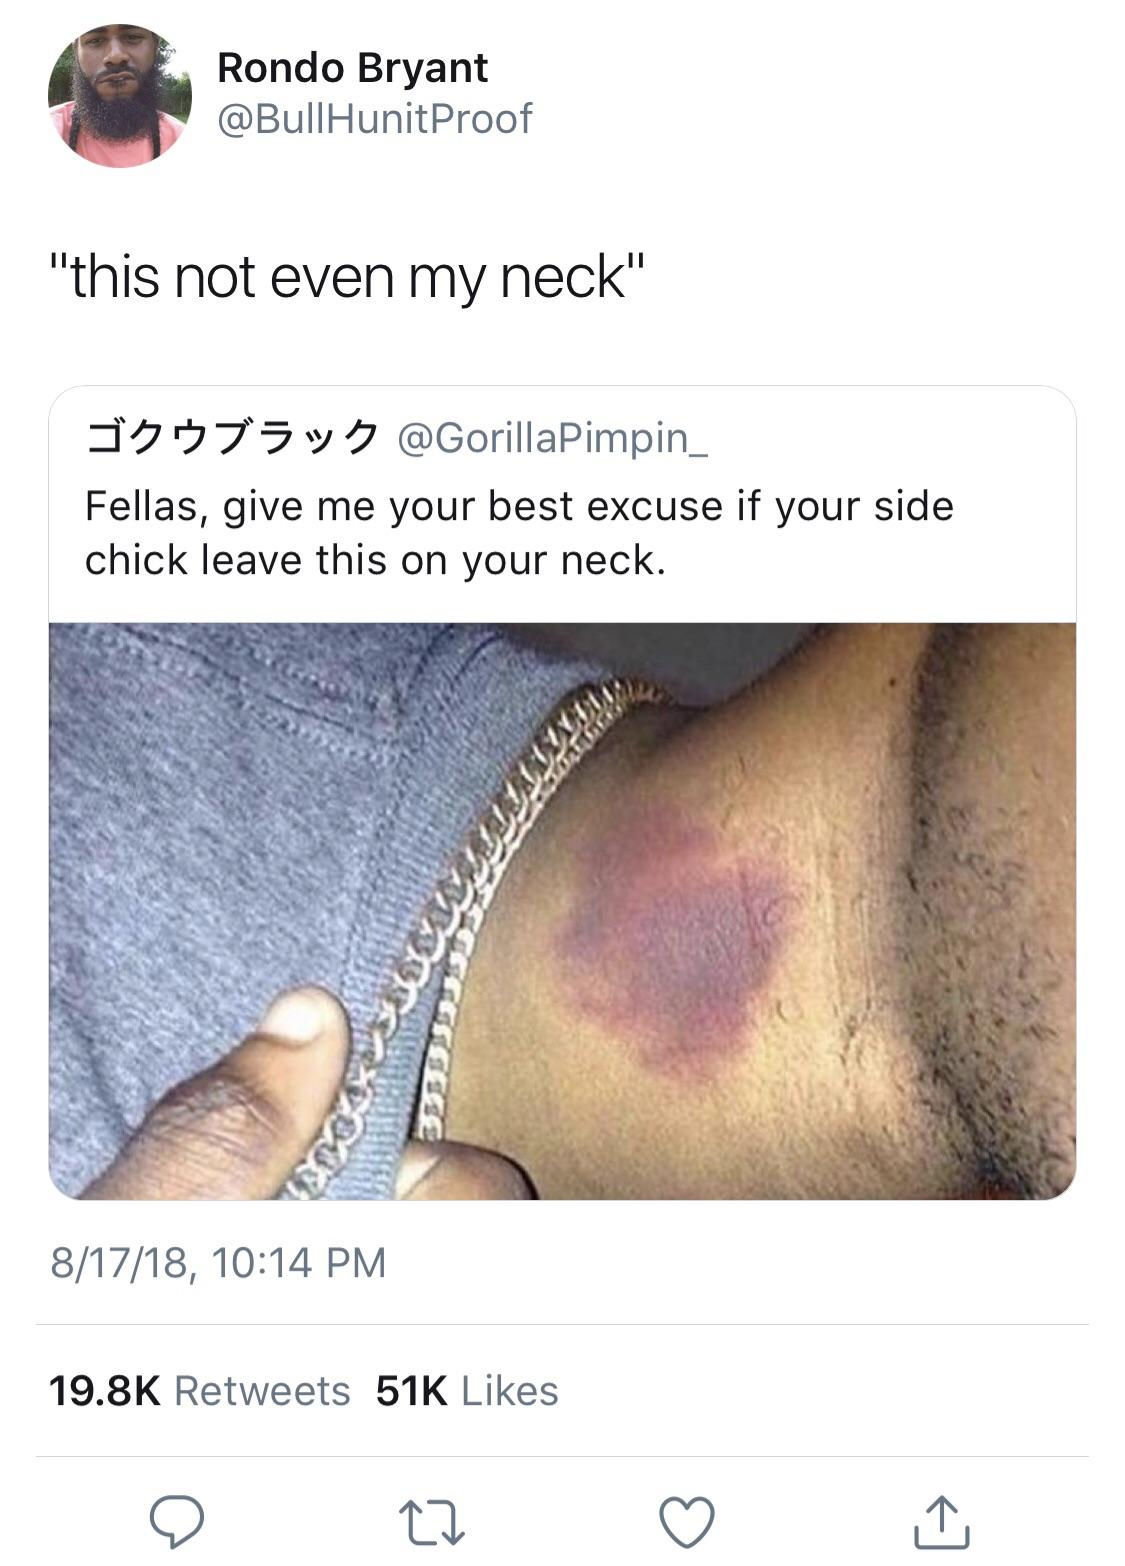 that's not even my neck - Rondo Bryant "this not even my neck" Fellas, give me your best excuse if your side chick leave this on your neck. Sevilla 81718, 51K